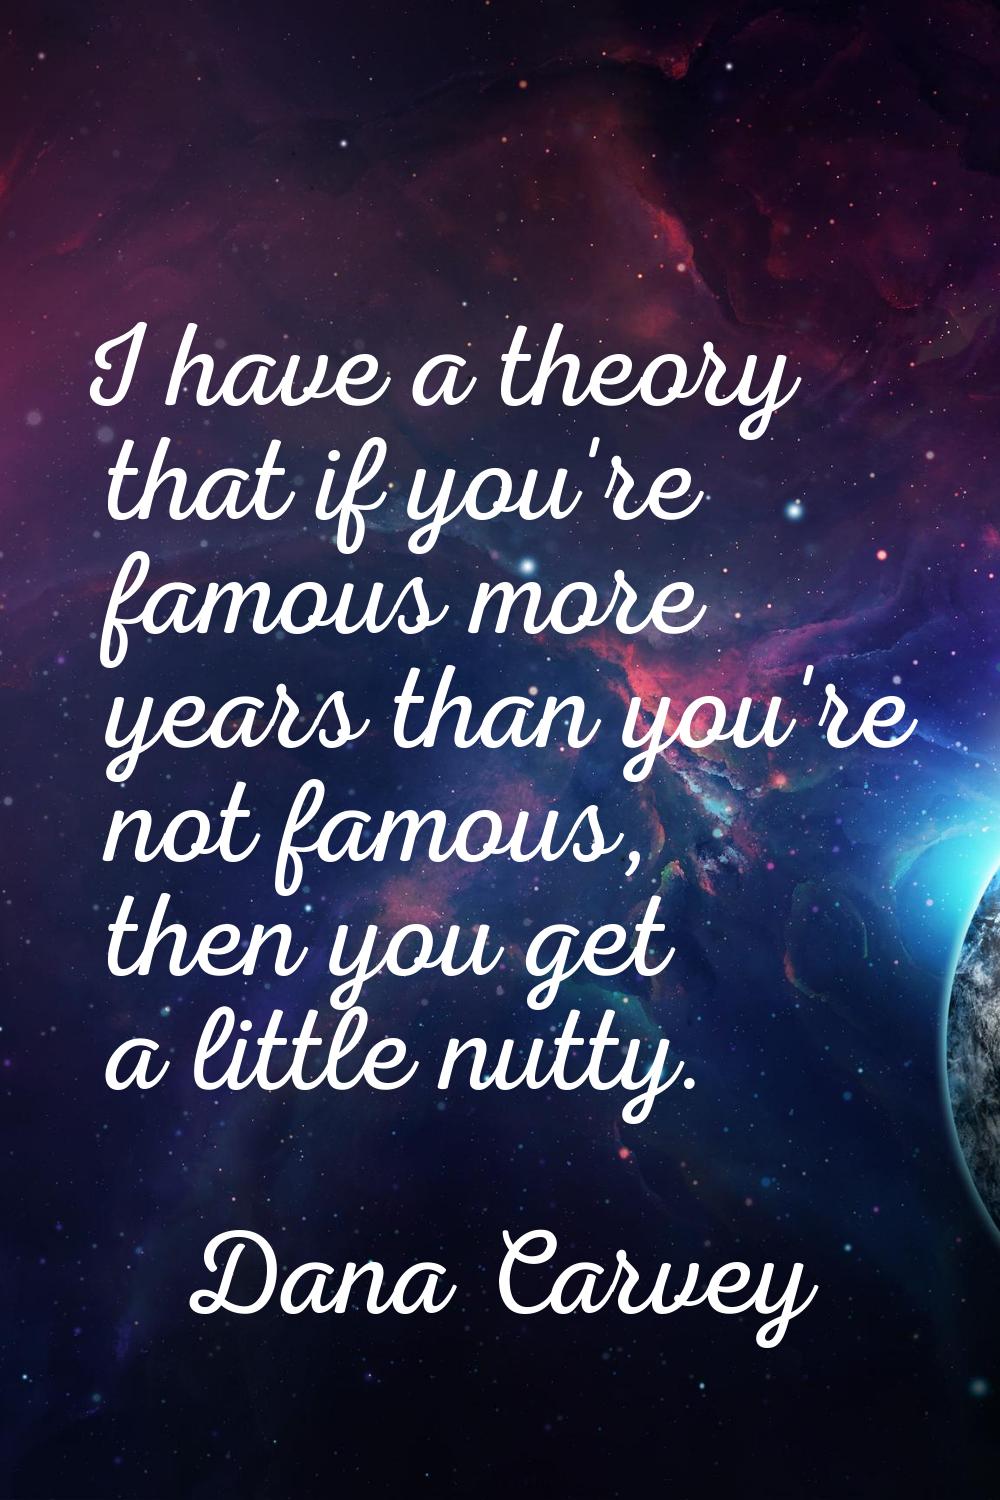 I have a theory that if you're famous more years than you're not famous, then you get a little nutt